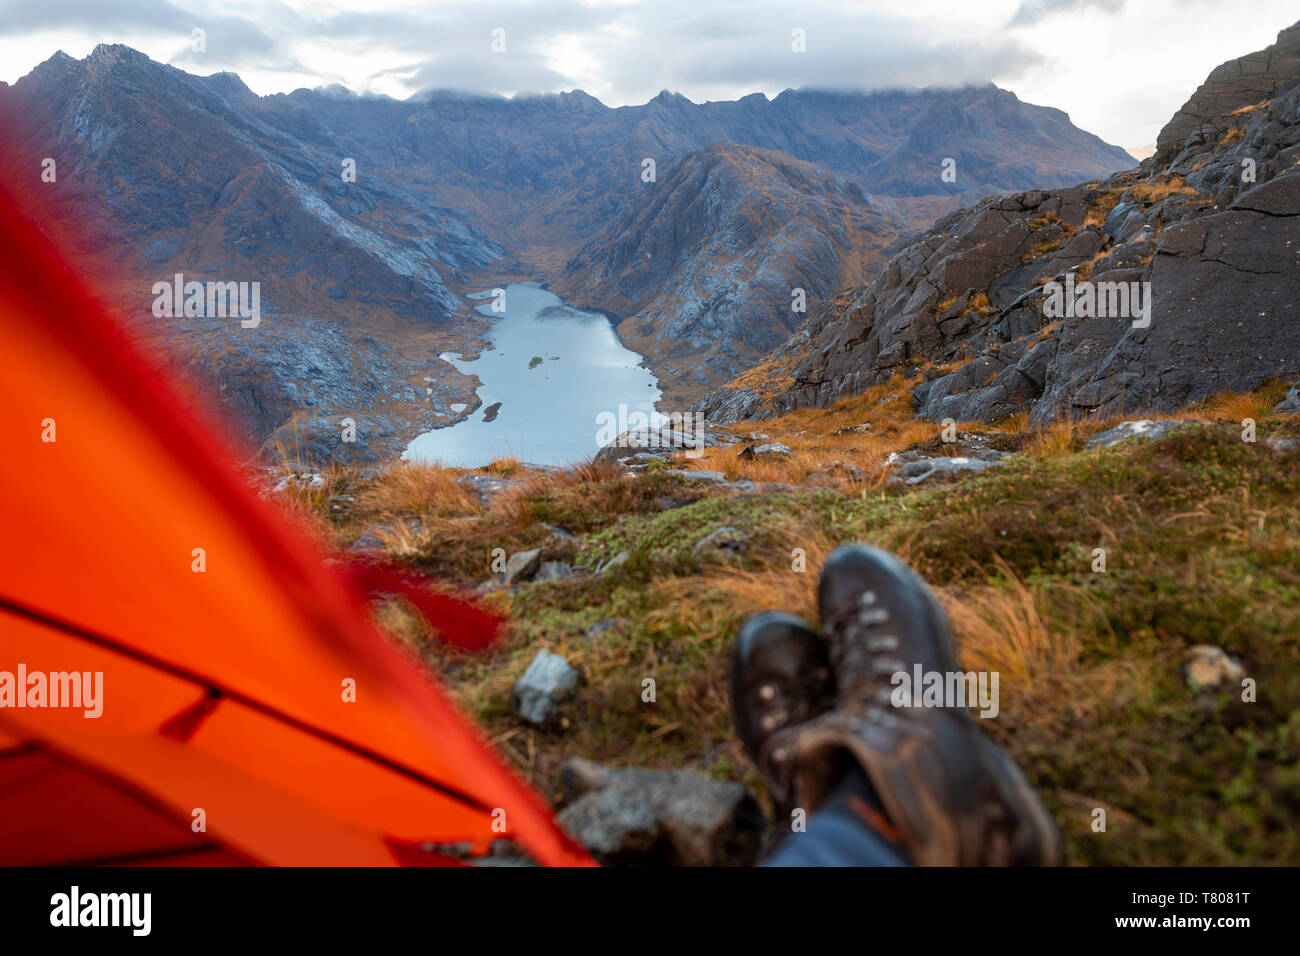 Wild camping on the top of Sgurr Na Stri looking towards Loch Coruisk and the main Cuillin ridge, Isle of Skye, Inner Hebrides, Scotland, UK Stock Photo